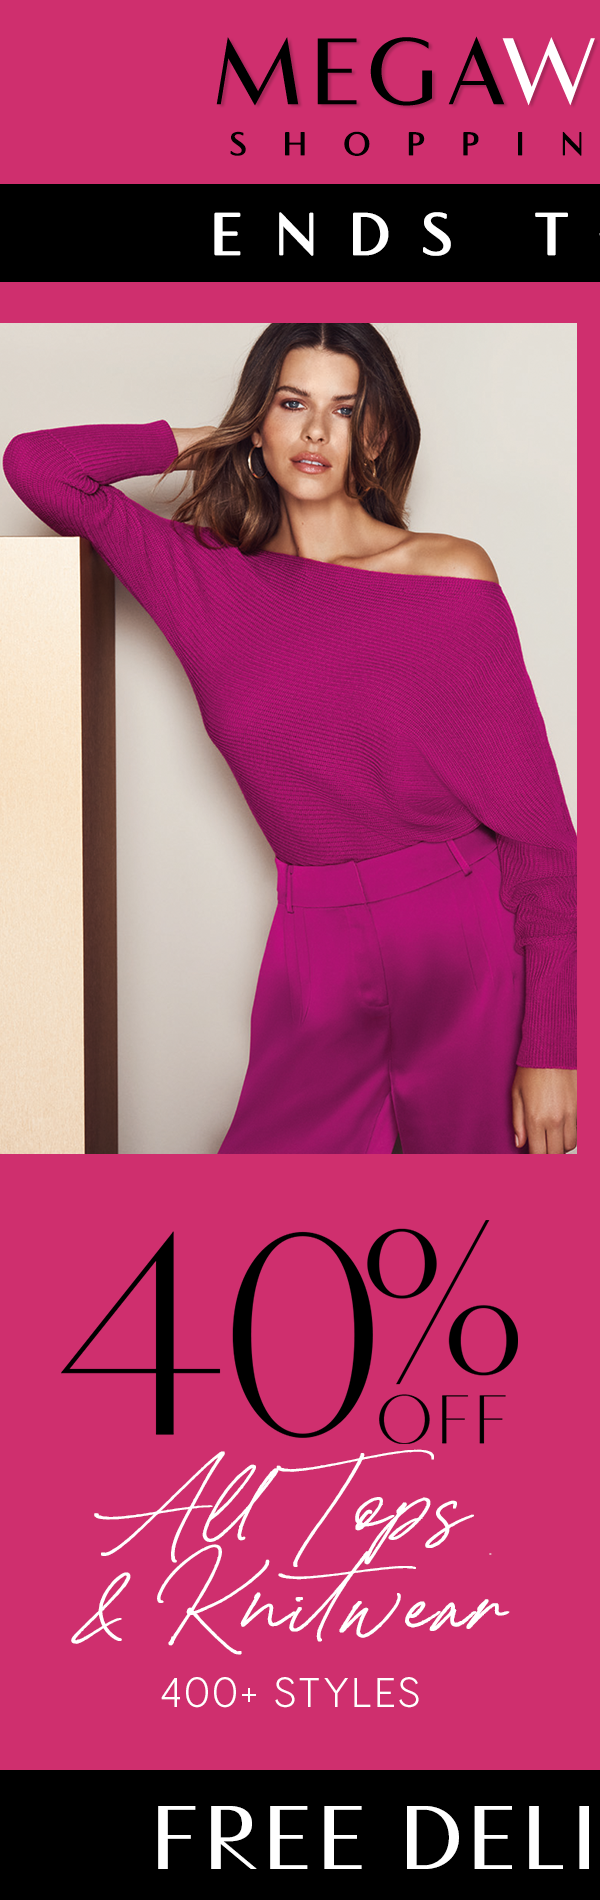 40% Off All Tops and Knitwear